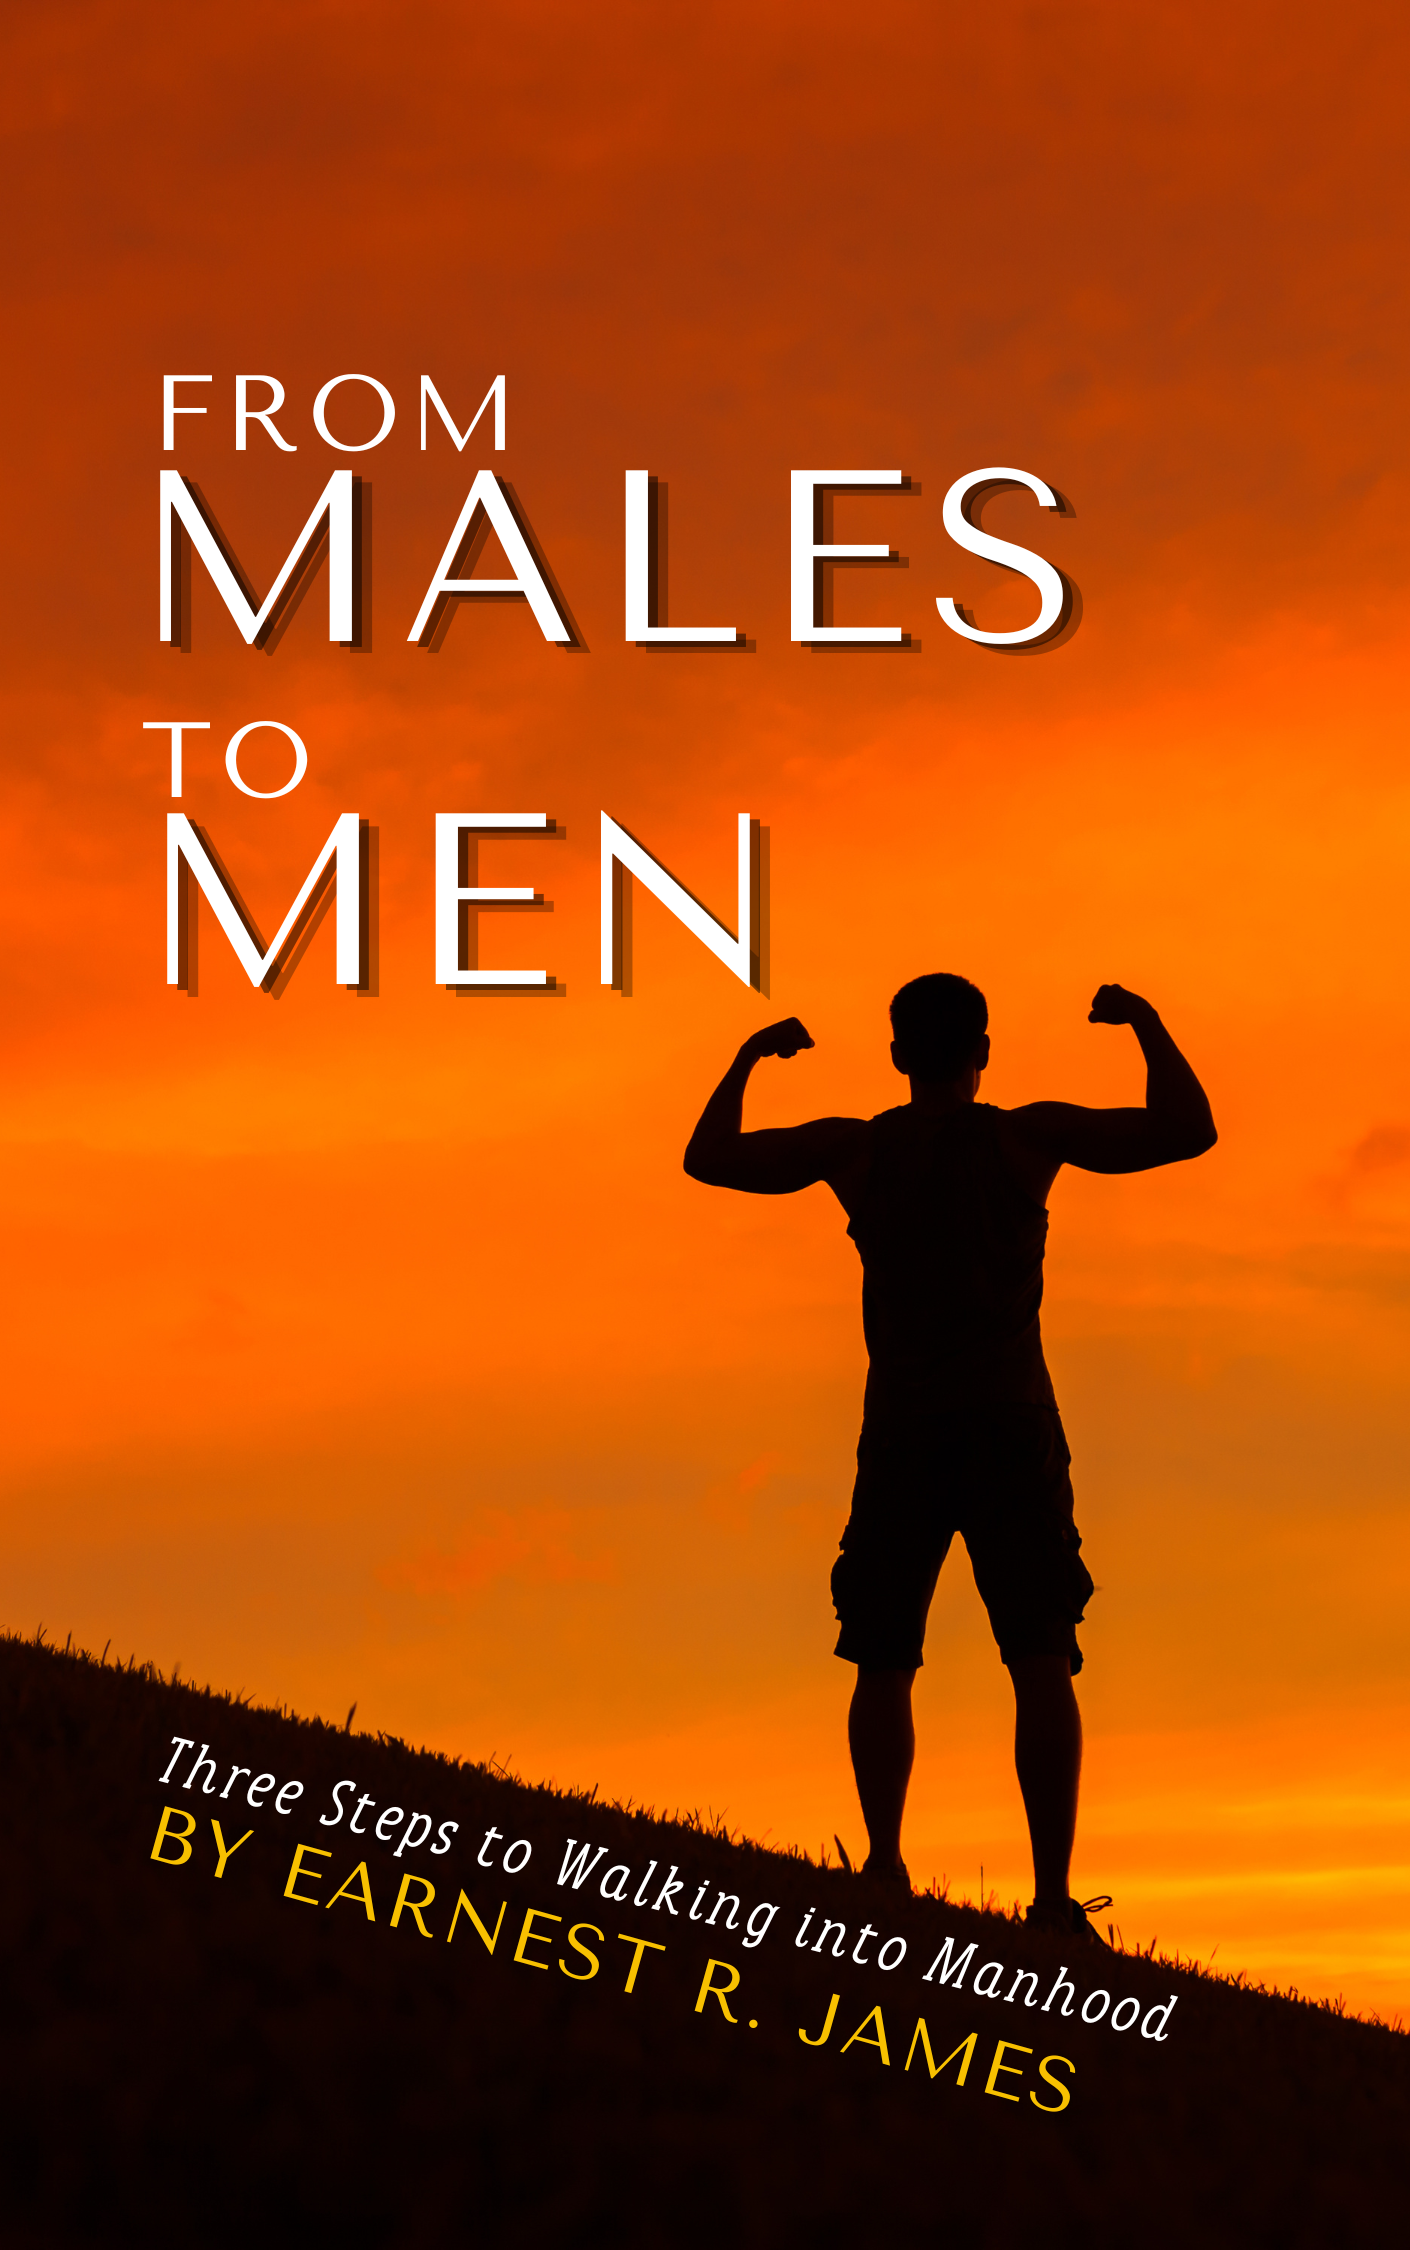 From Males to Men: Three steps for walking into manhood